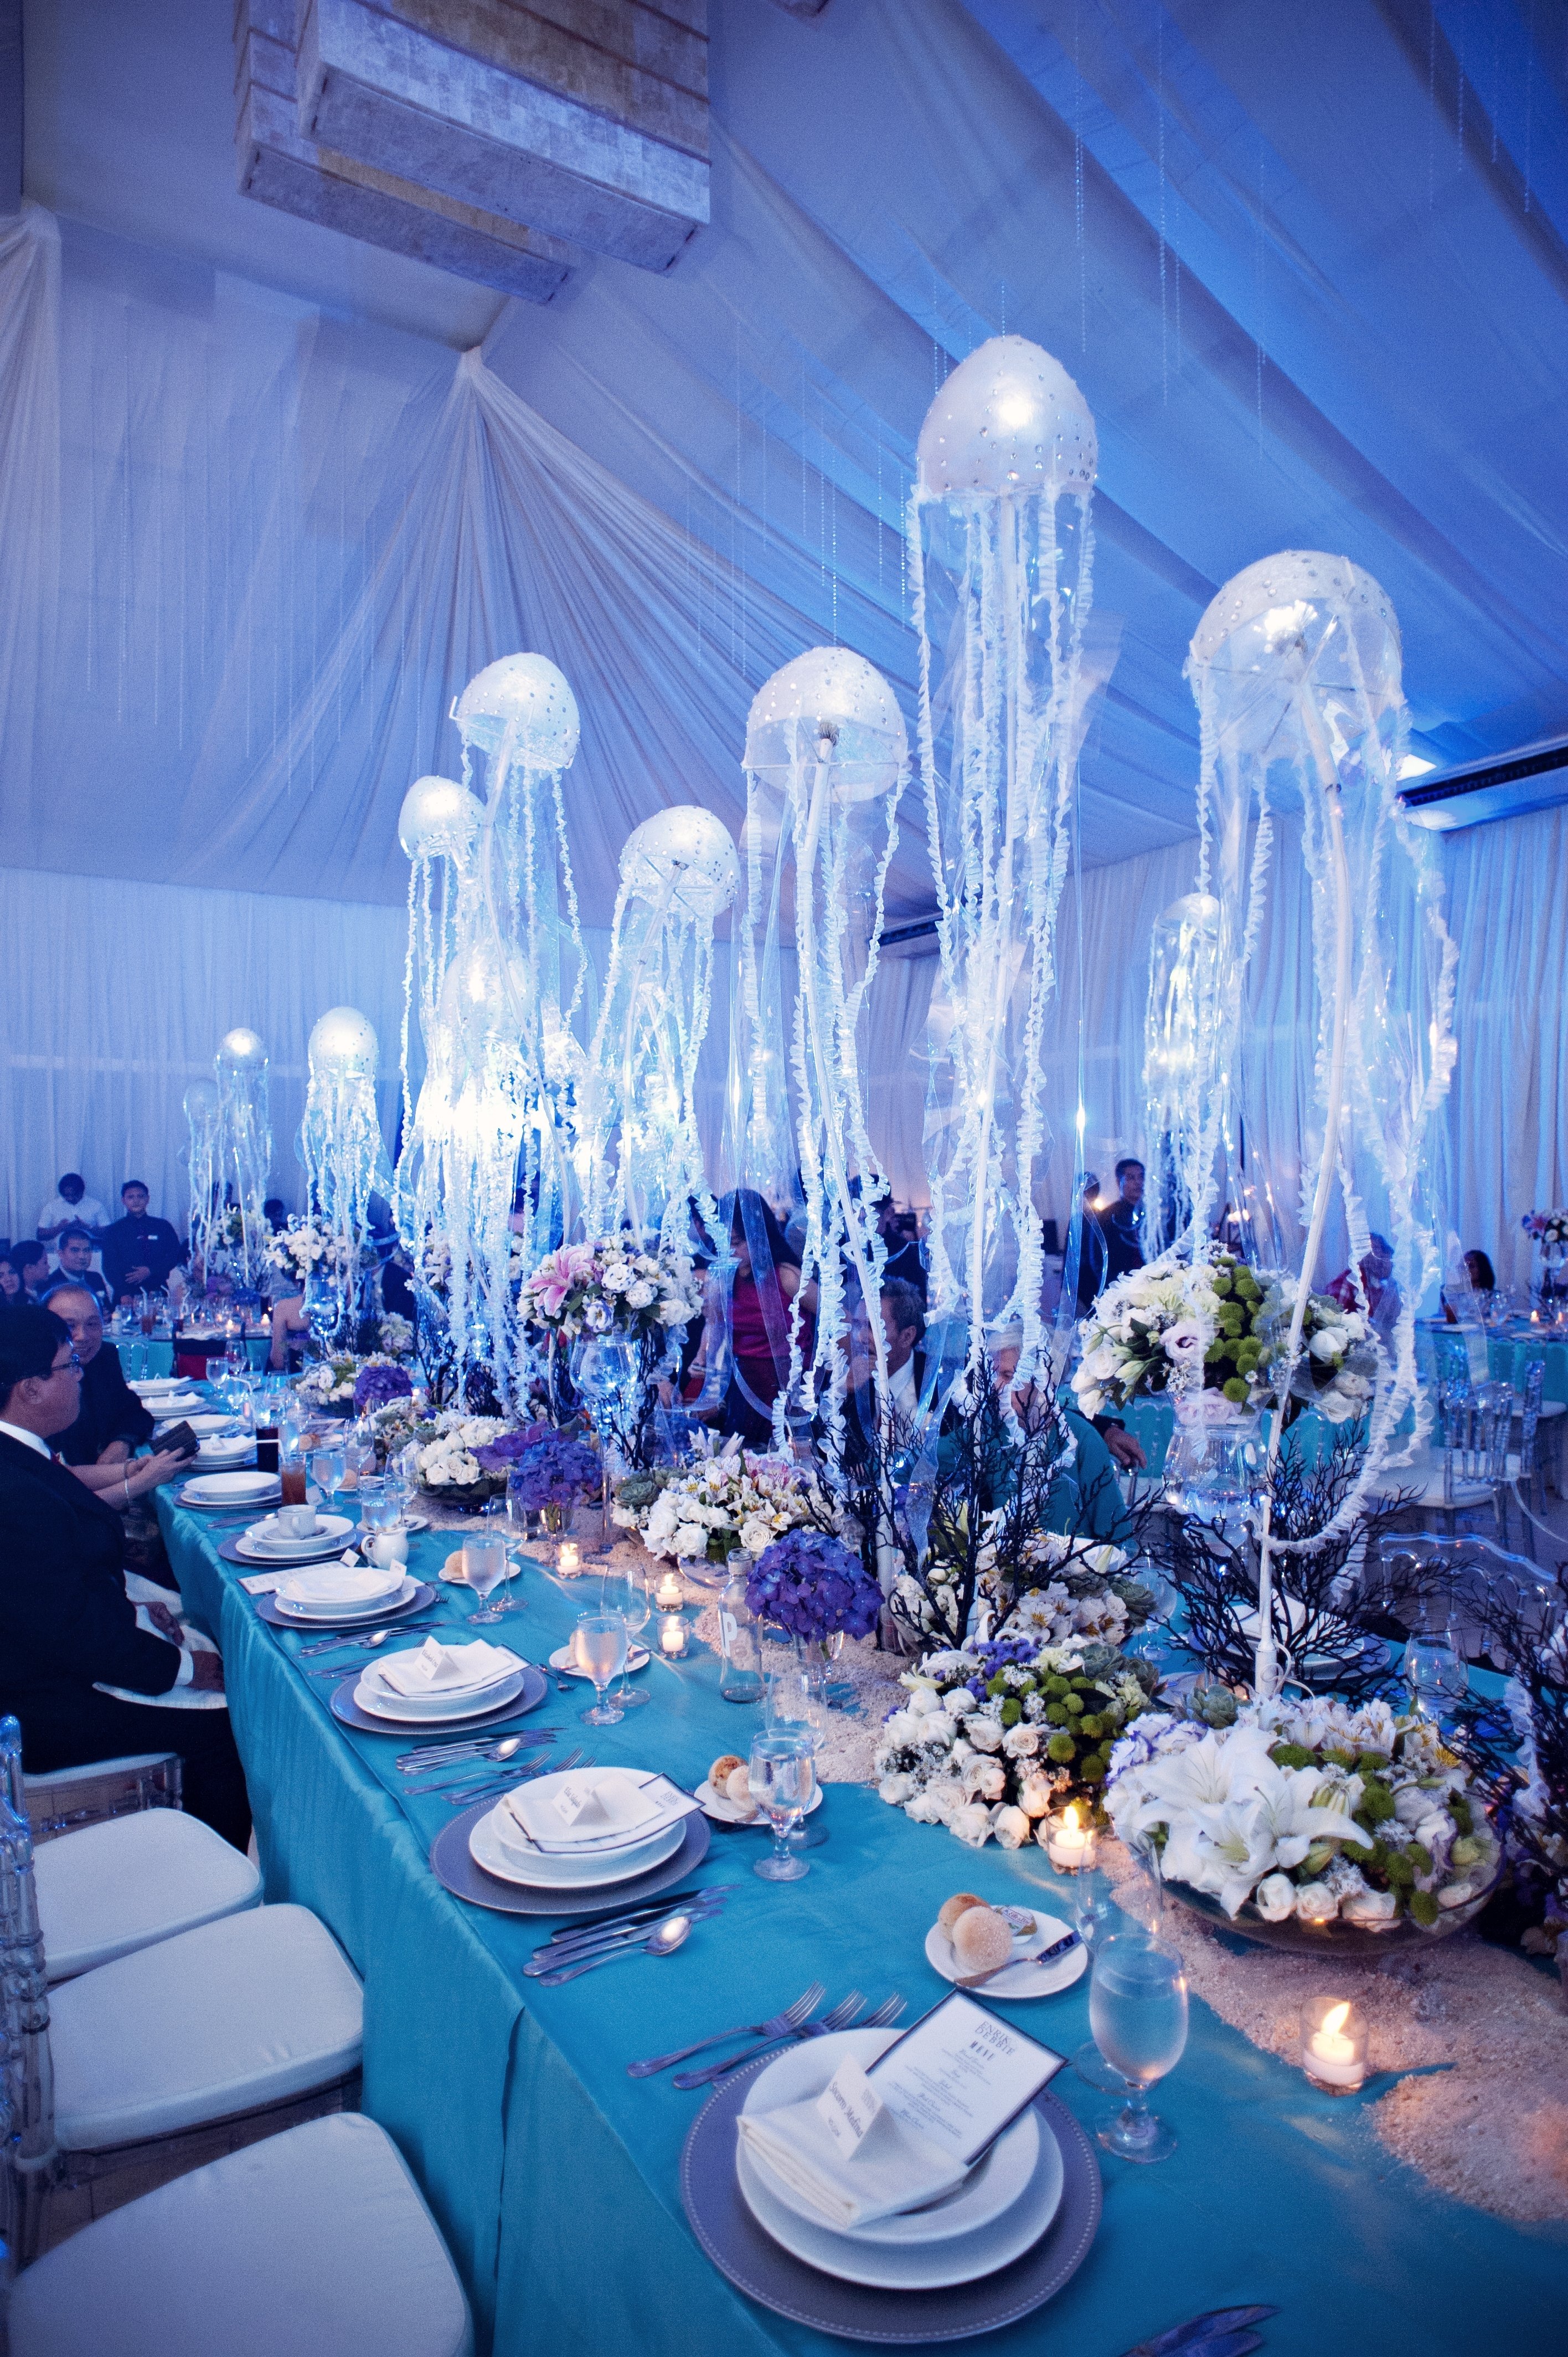 10 Fabulous Under The Sea Centerpiece Ideas under the sea wedding motif with hanging jellyfish table decorations 2022